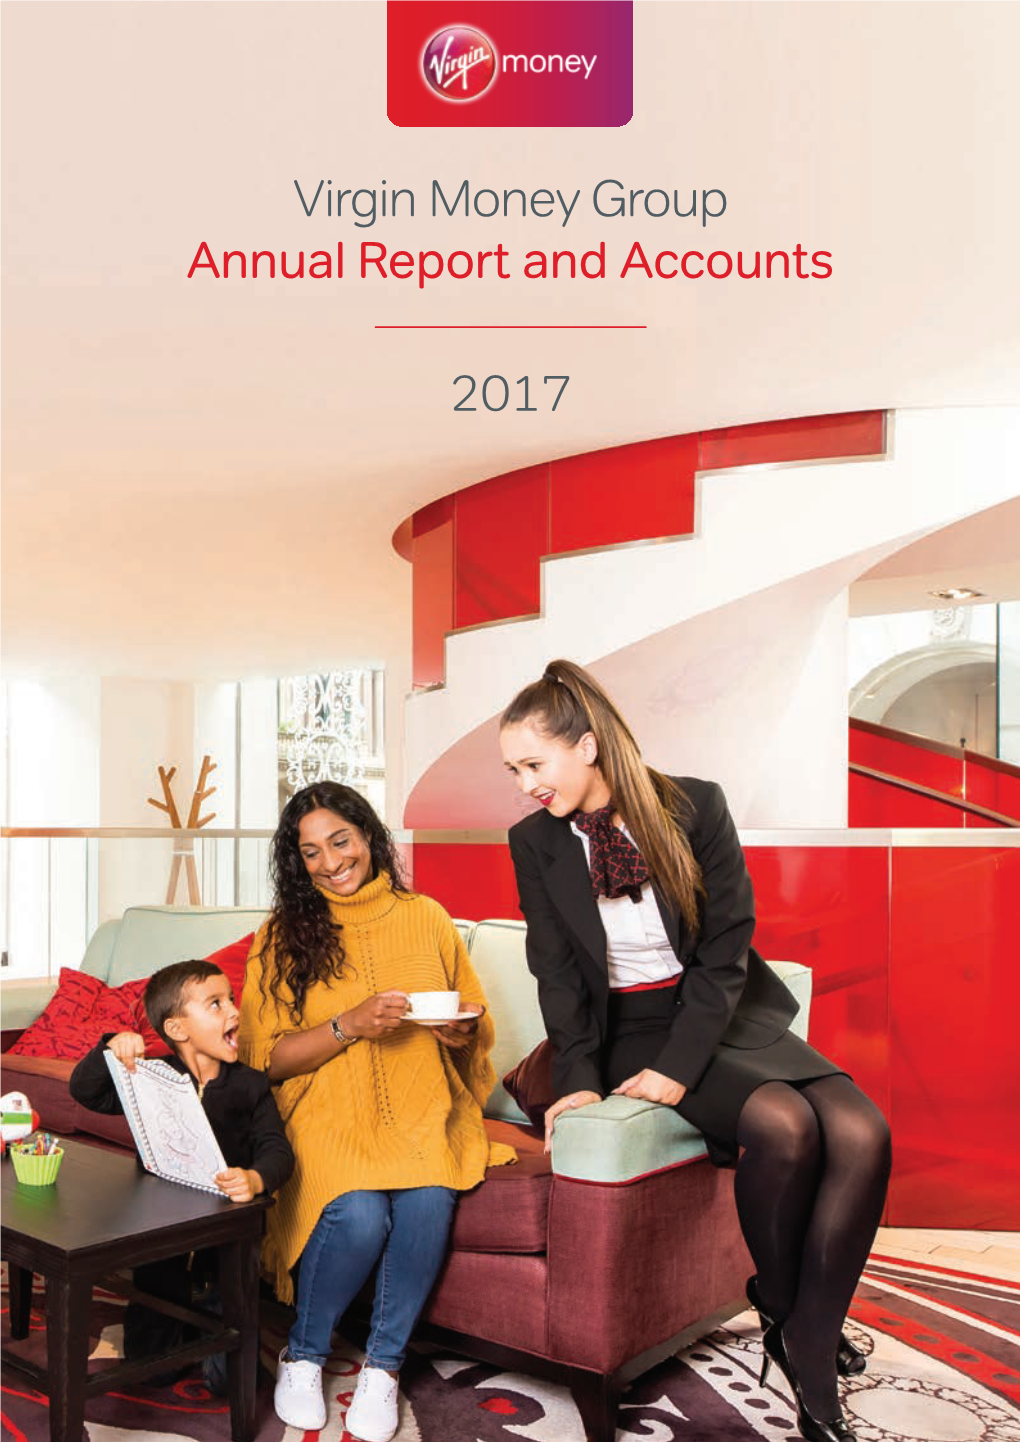 Virgin Money Group Annual Report and Accounts 2017